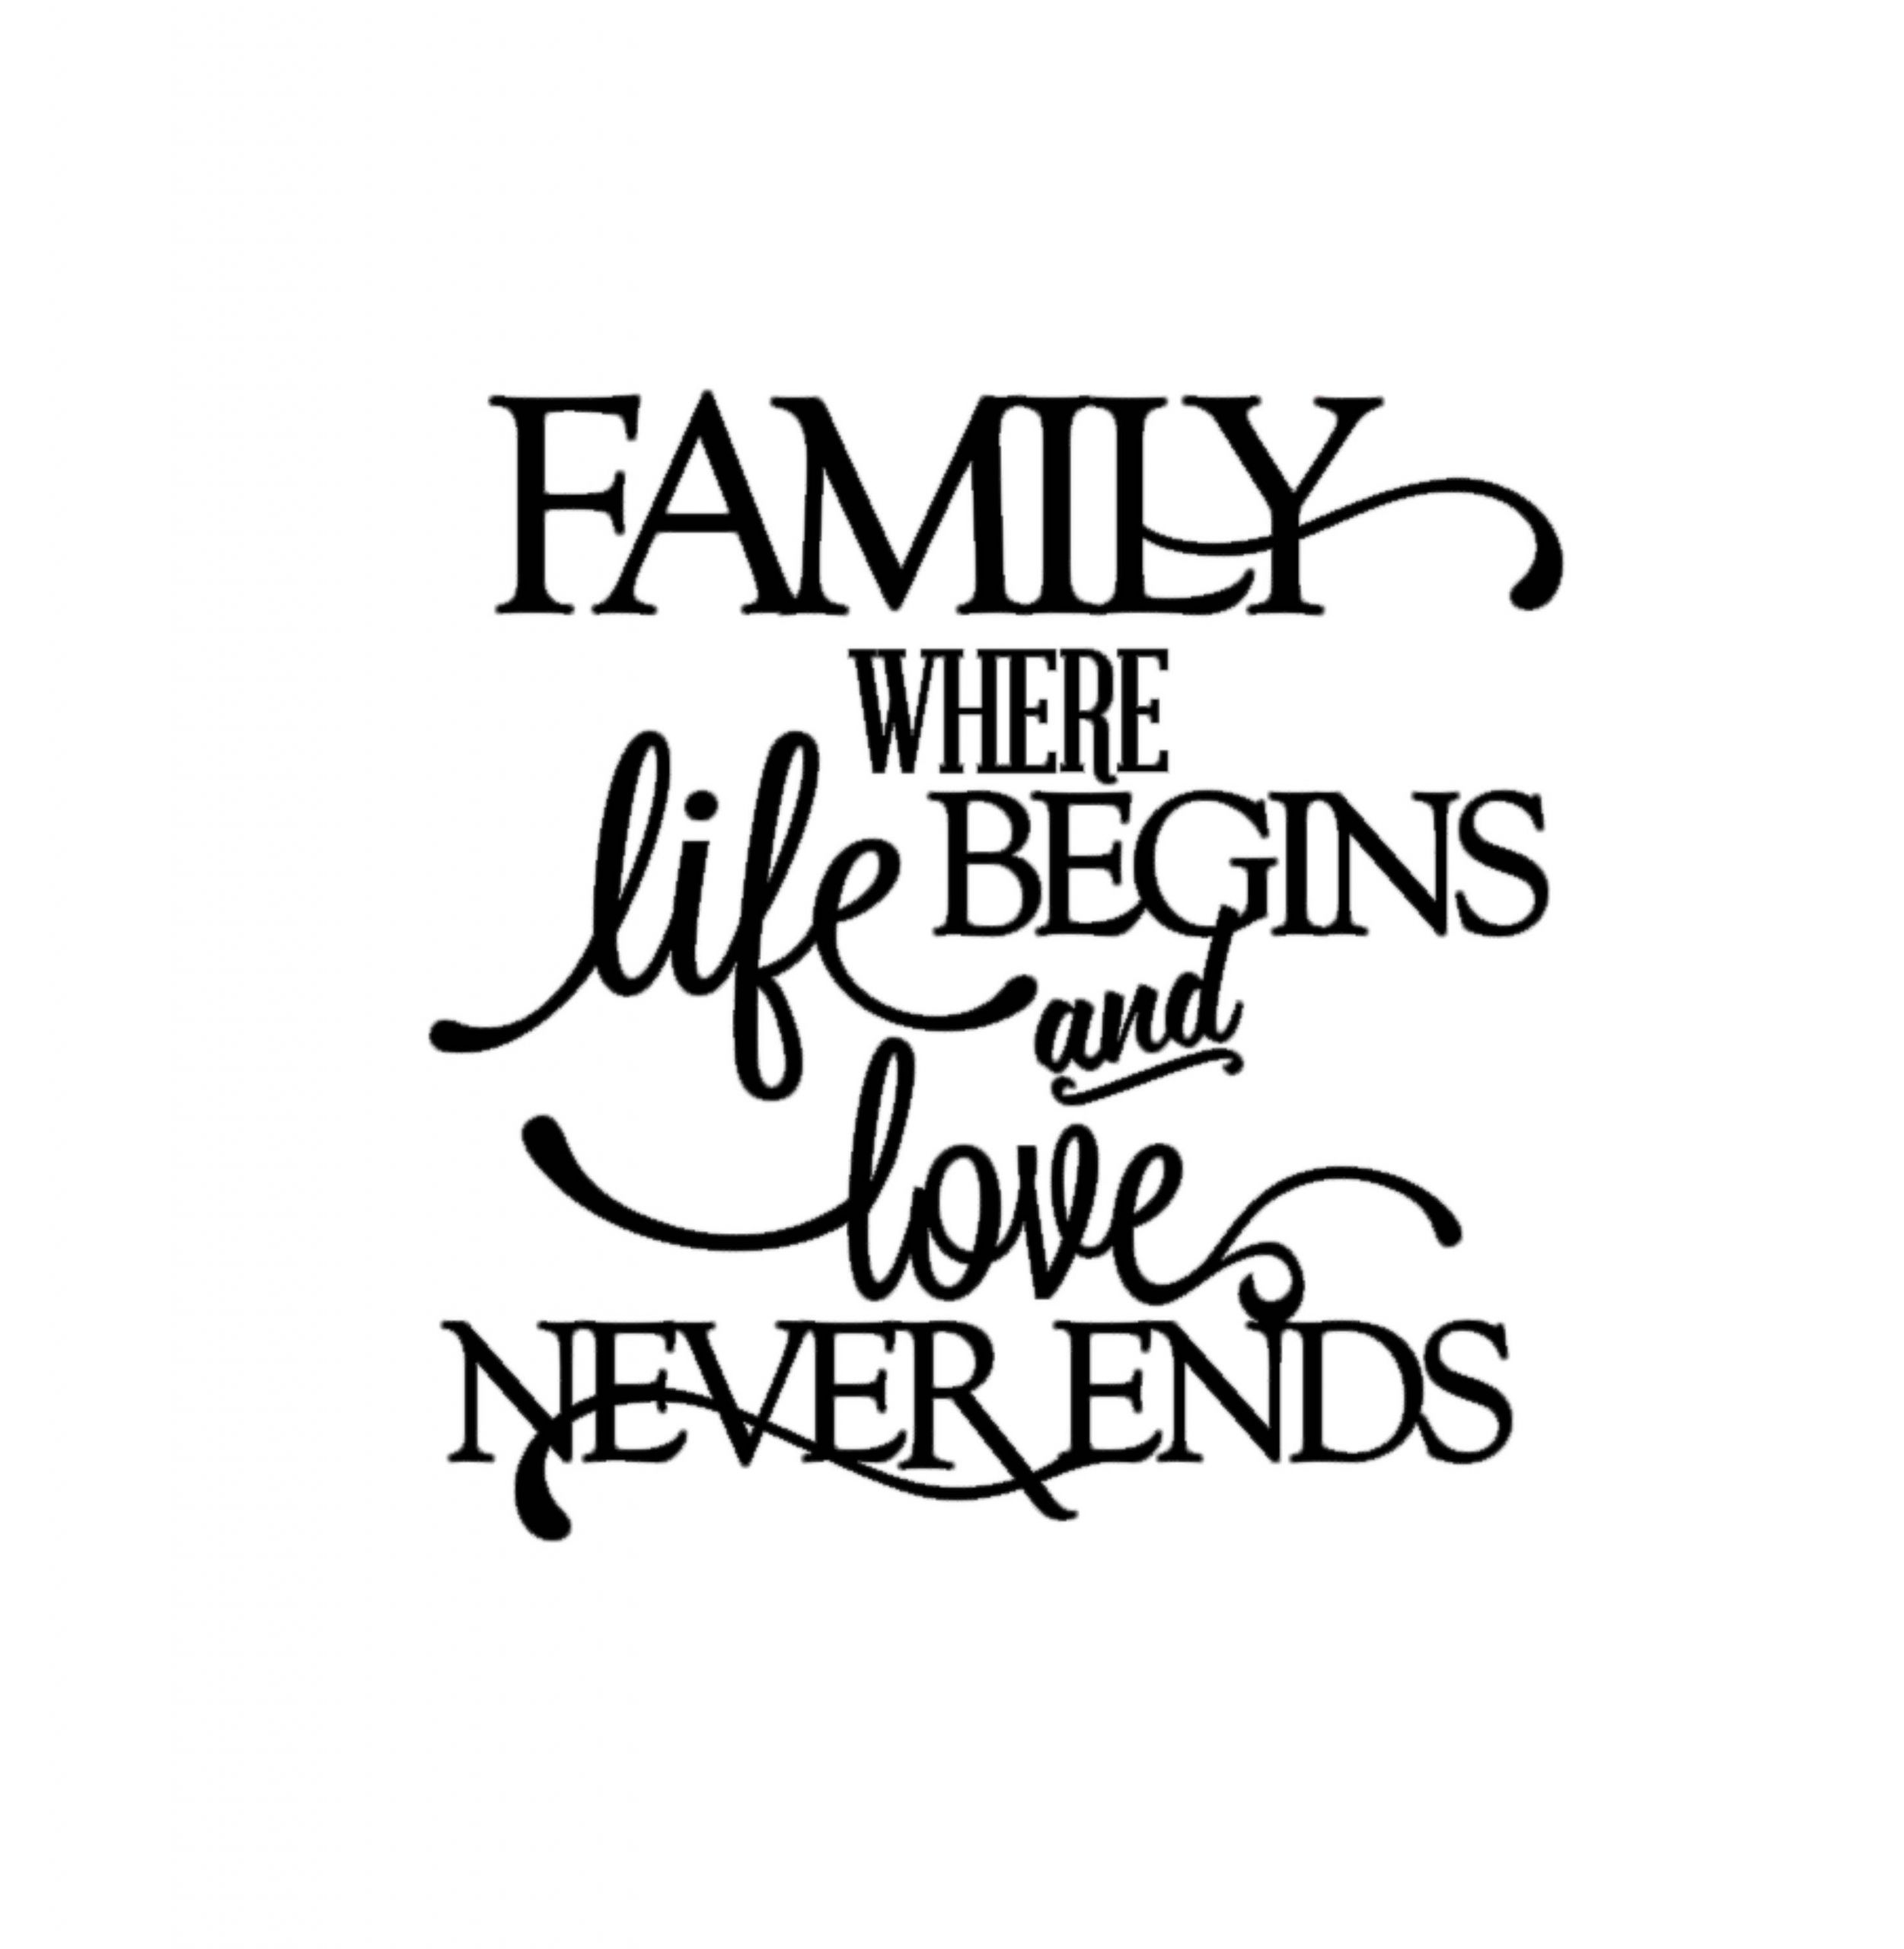 Quotes On Family Love
 Family Where Life Begins and Love Never Ends Quote Decal